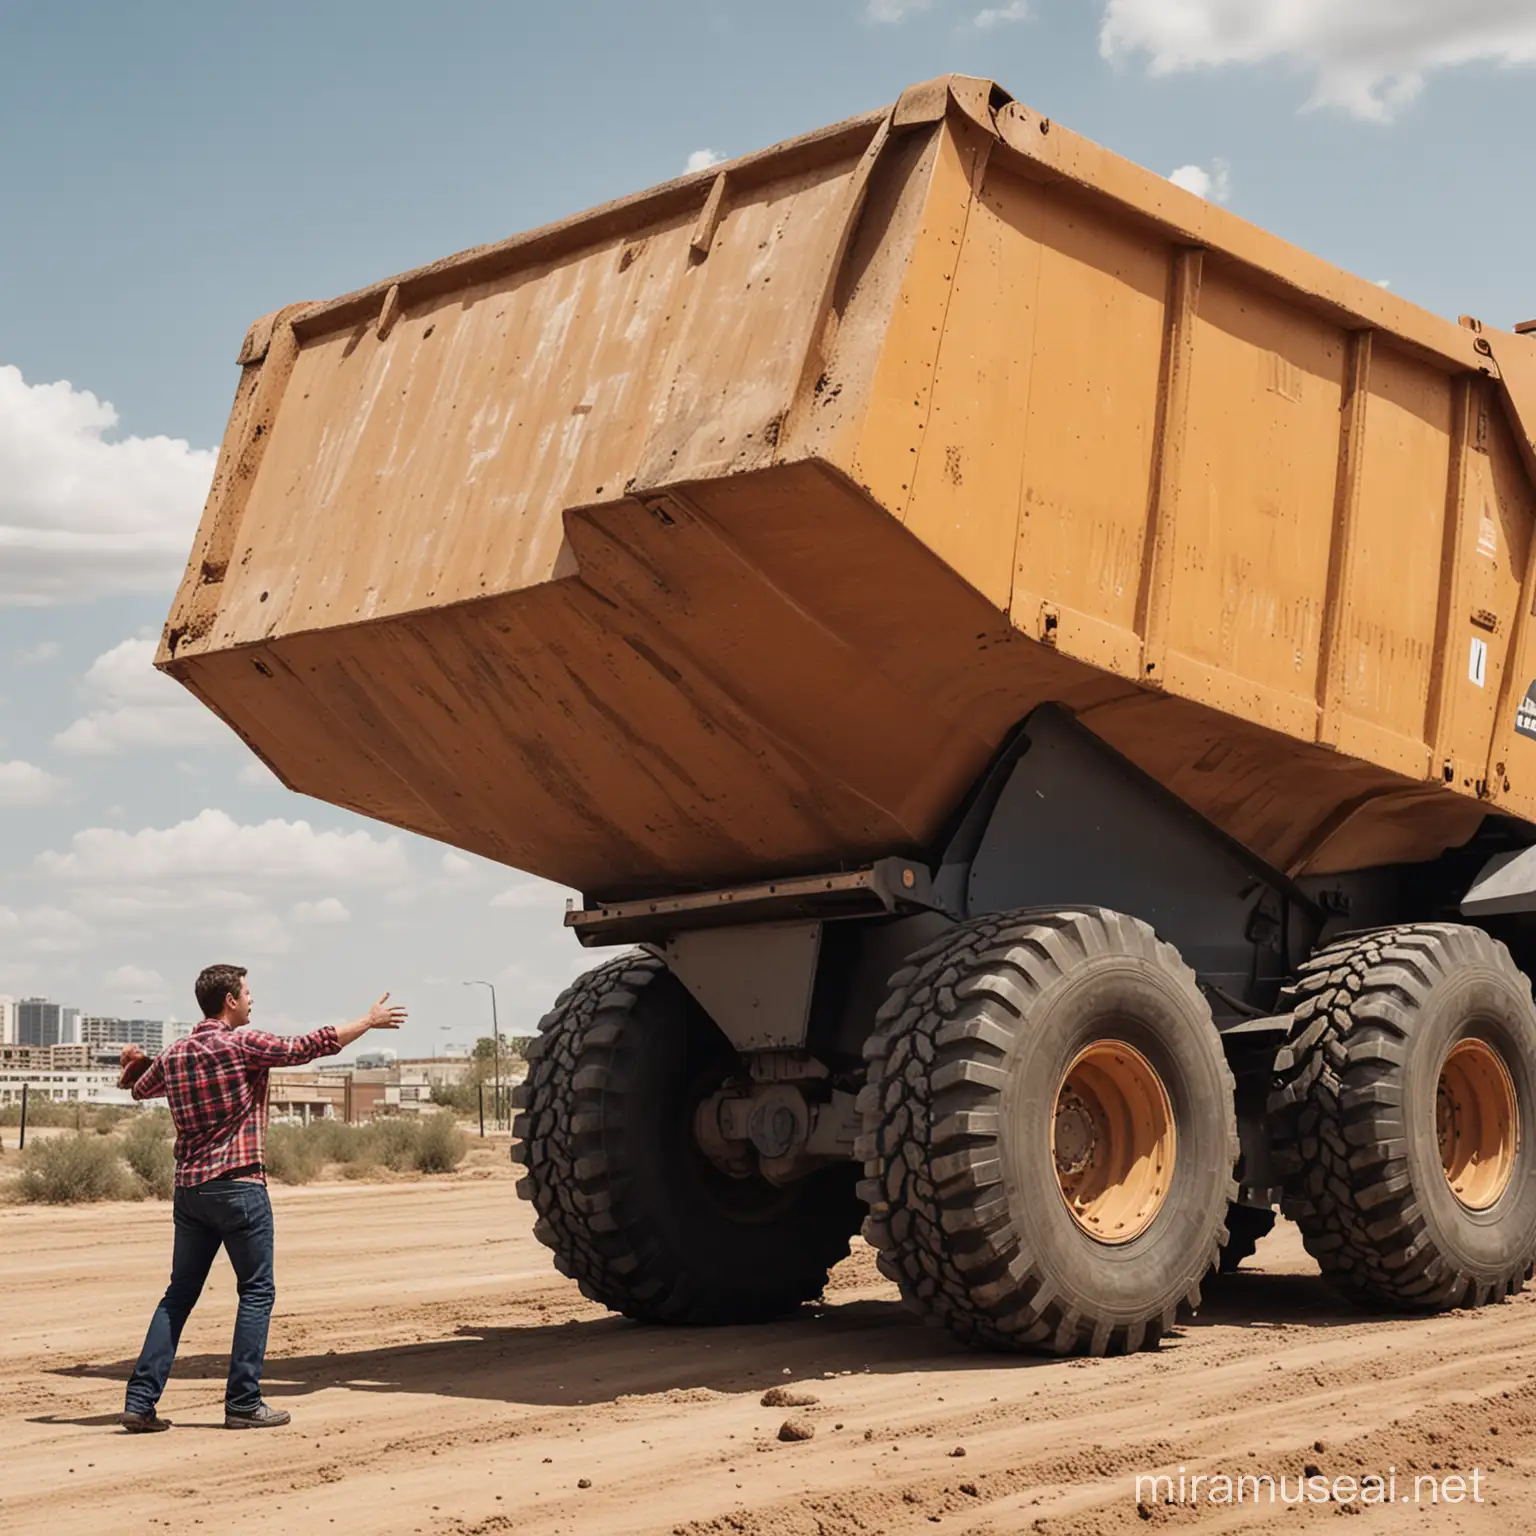 A man with a gigantic dumptruck emerging from his butt